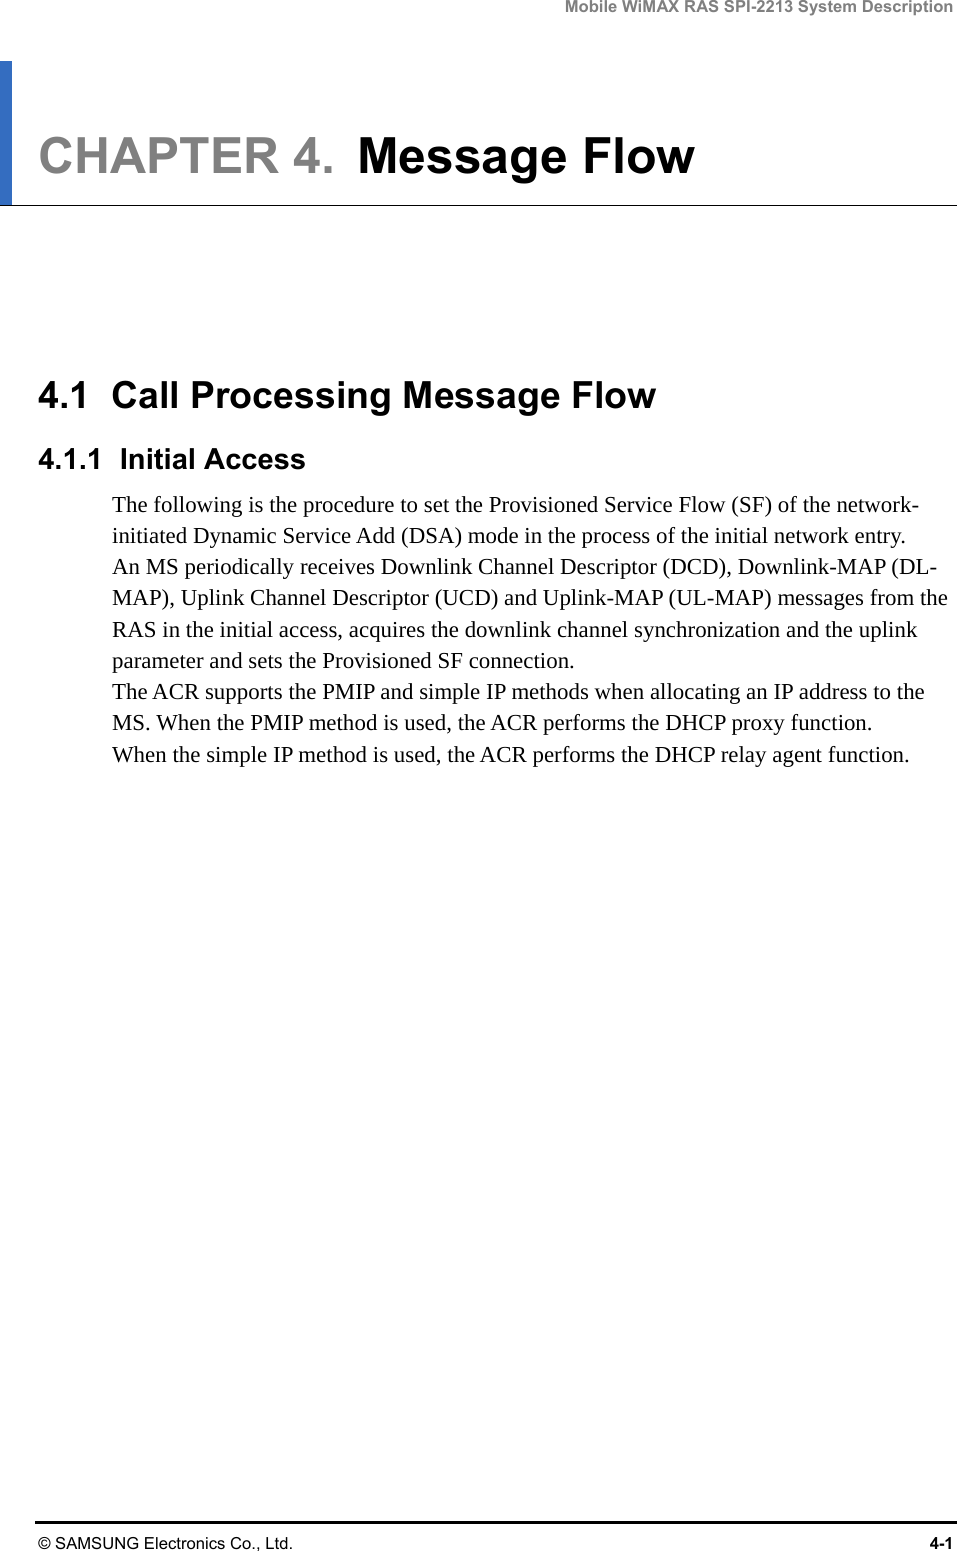 Mobile WiMAX RAS SPI-2213 System Description © SAMSUNG Electronics Co., Ltd.  4-1 CHAPTER 4.  Message Flow      4.1  Call Processing Message Flow 4.1.1 Initial Access The following is the procedure to set the Provisioned Service Flow (SF) of the network-initiated Dynamic Service Add (DSA) mode in the process of the initial network entry. An MS periodically receives Downlink Channel Descriptor (DCD), Downlink-MAP (DL-MAP), Uplink Channel Descriptor (UCD) and Uplink-MAP (UL-MAP) messages from the RAS in the initial access, acquires the downlink channel synchronization and the uplink parameter and sets the Provisioned SF connection.   The ACR supports the PMIP and simple IP methods when allocating an IP address to the MS. When the PMIP method is used, the ACR performs the DHCP proxy function.   When the simple IP method is used, the ACR performs the DHCP relay agent function.  